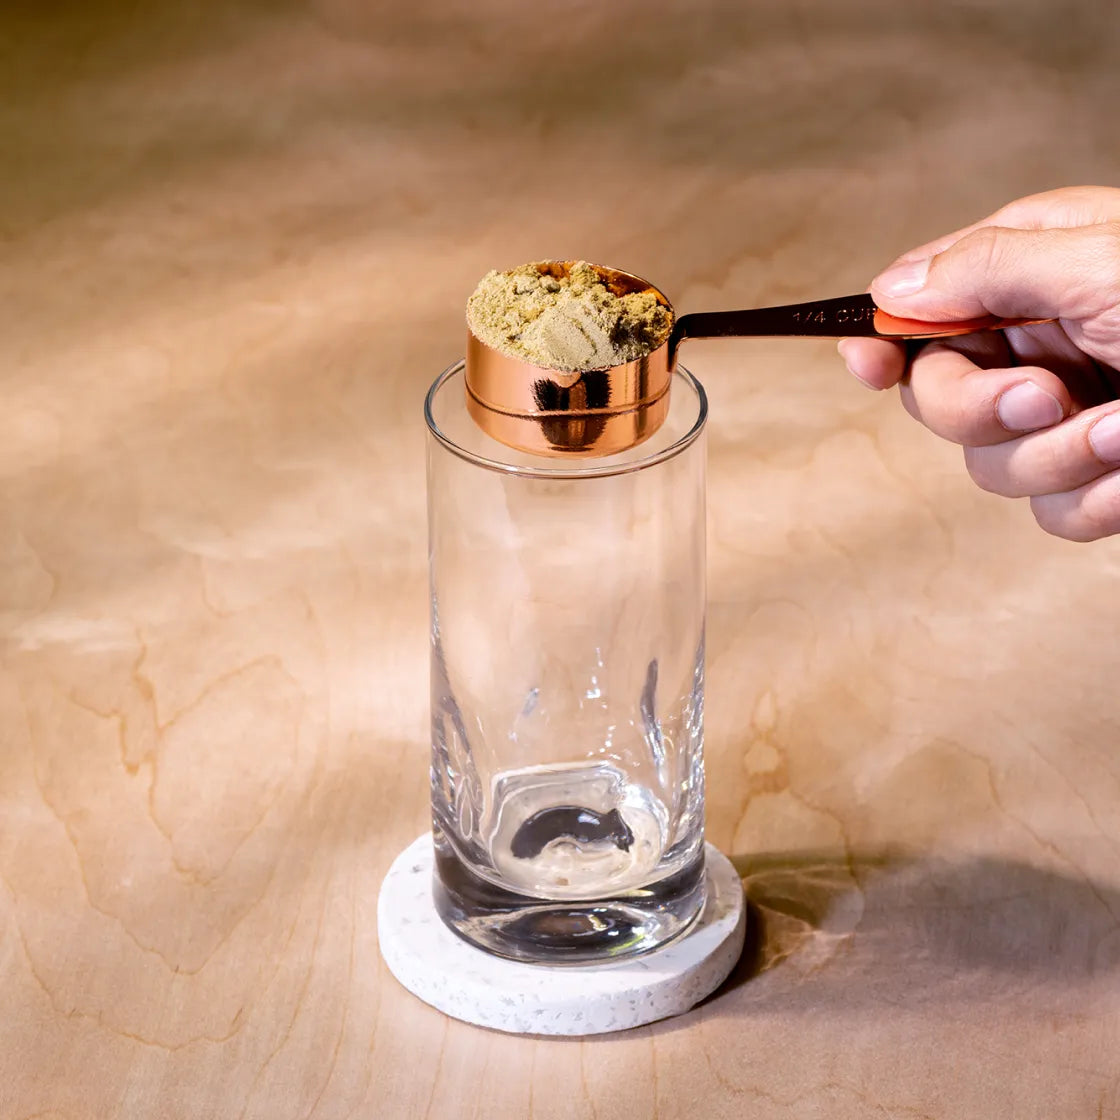 A hand holding a scoop of HEAL over an empty glass.